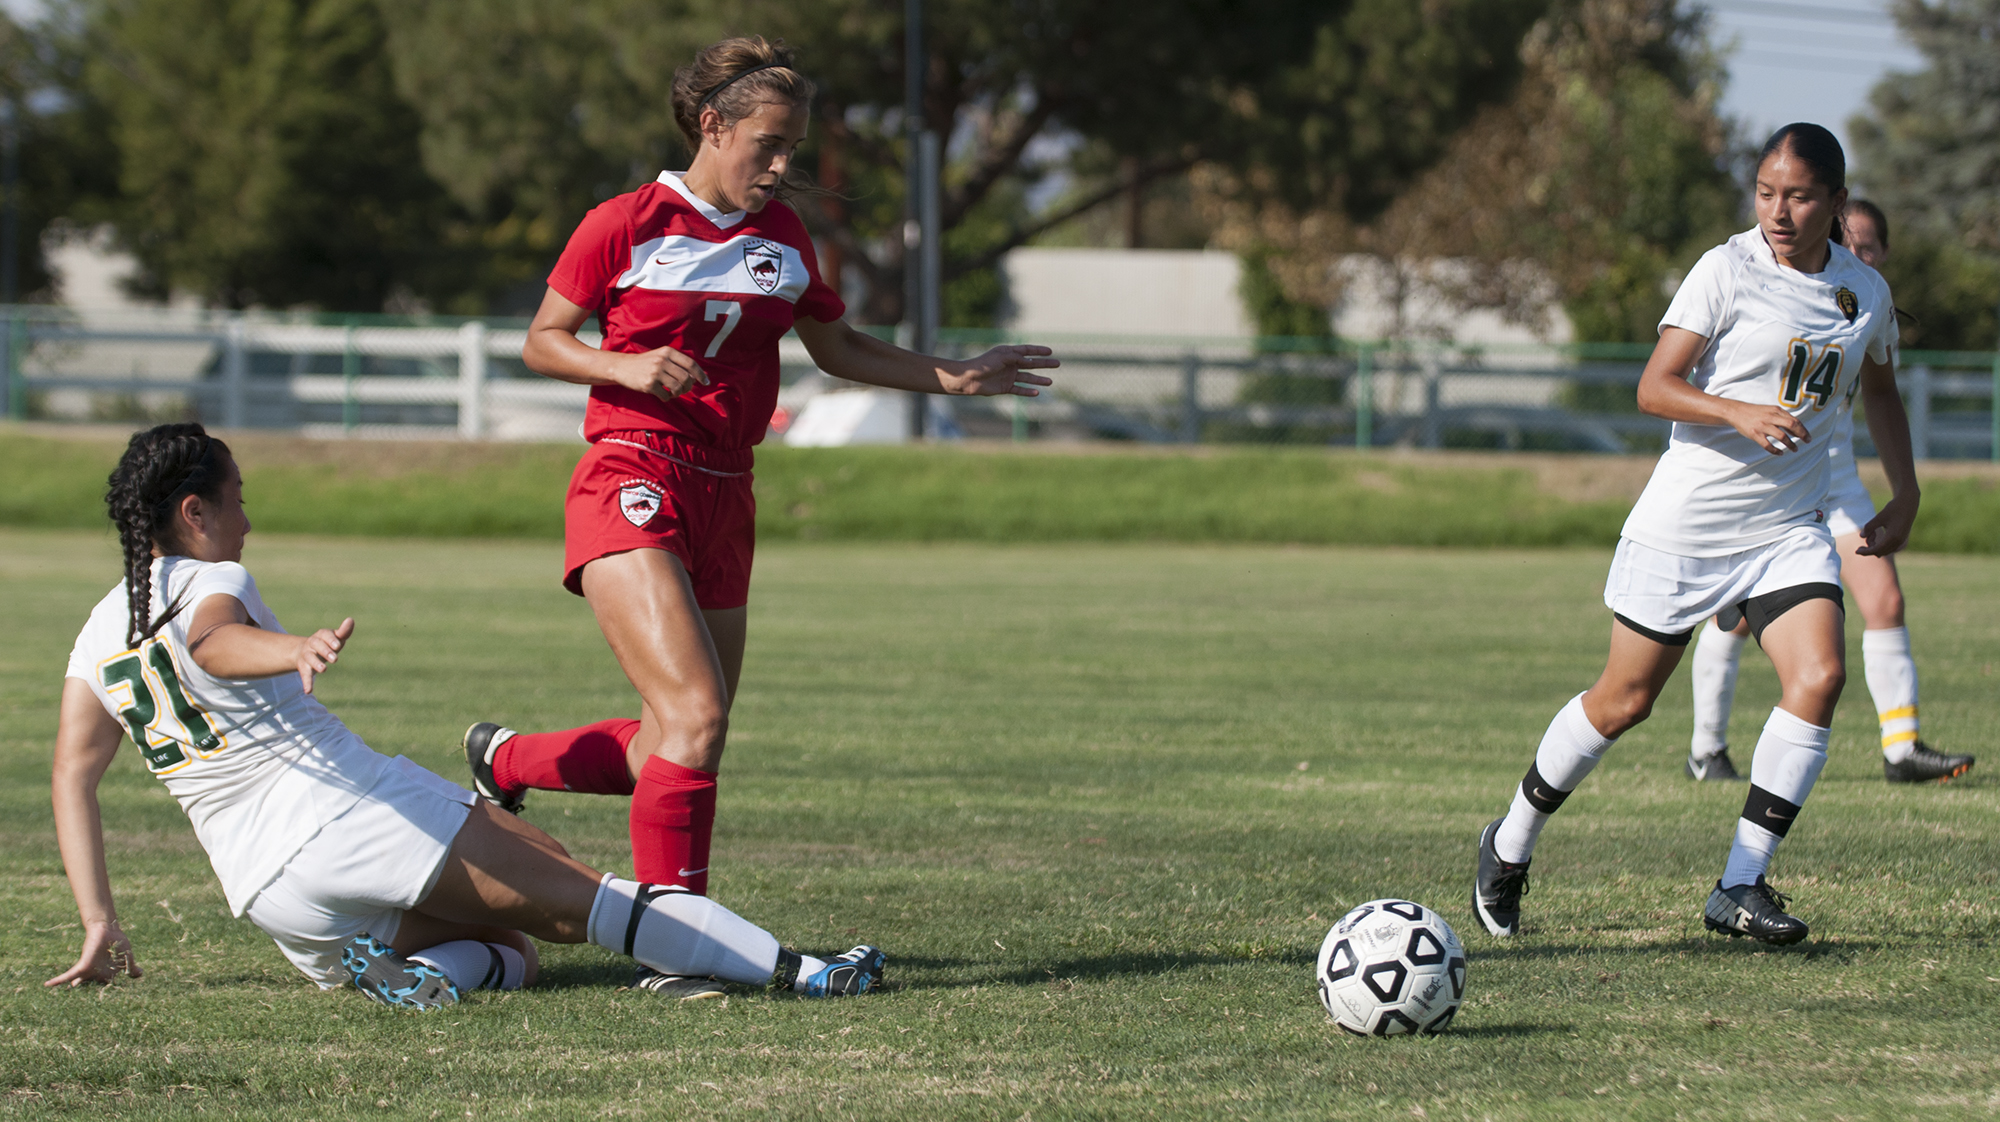 Women’s soccer team beats Valley in heated game